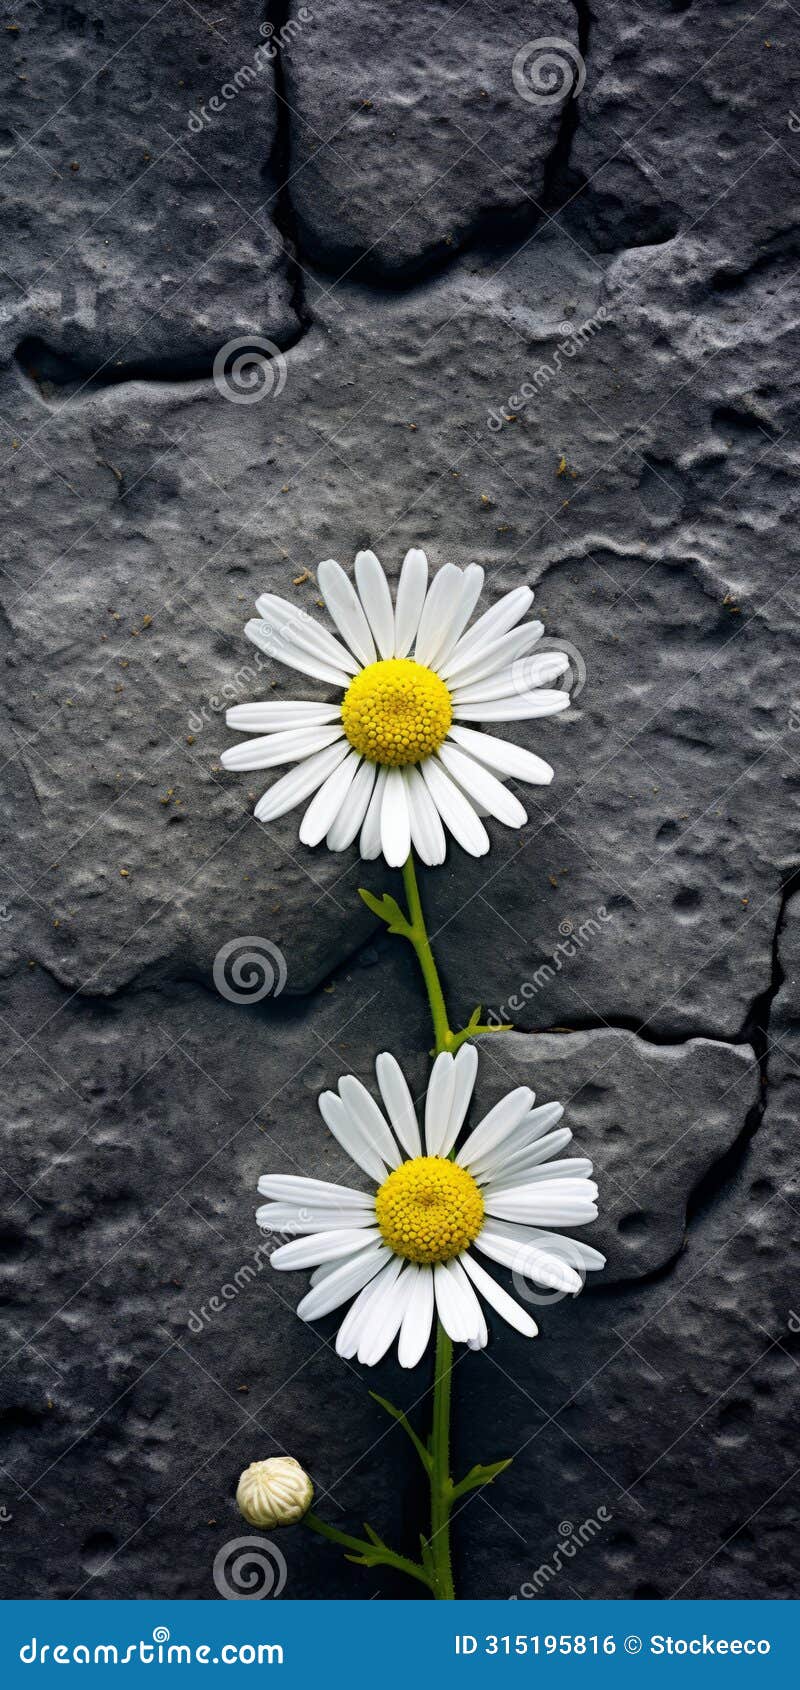 cracked wall blooms: a captivating photograph of daisies in mitch griffiths' style